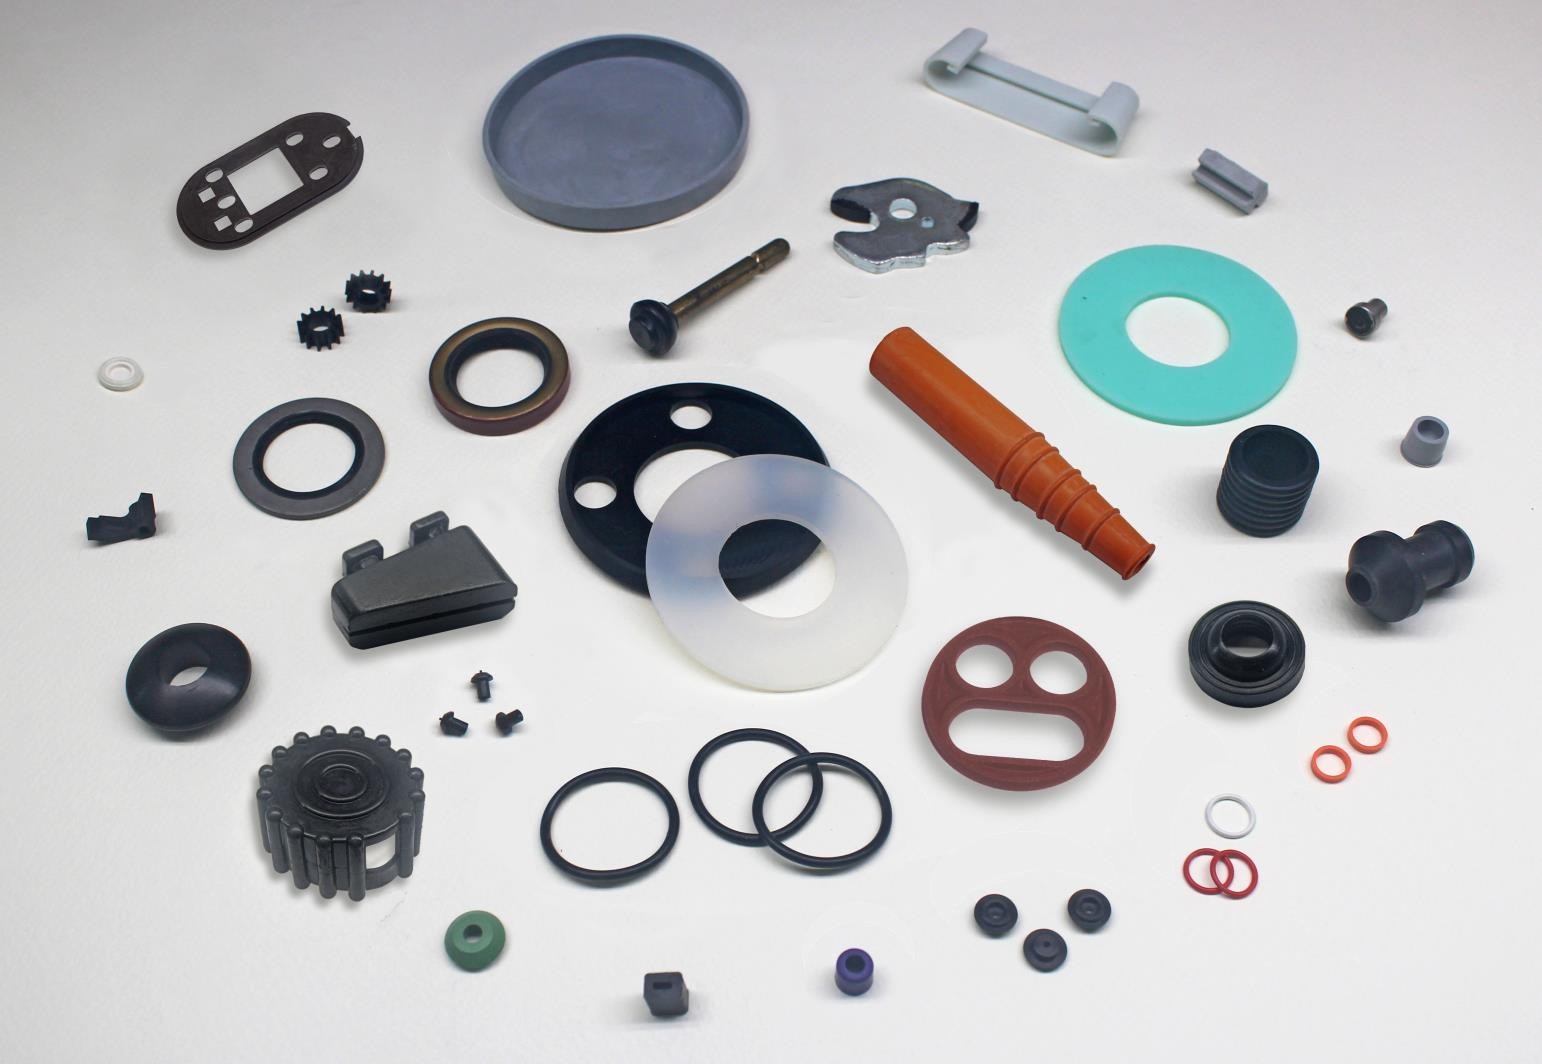 Rubber Special Round Specification Parts